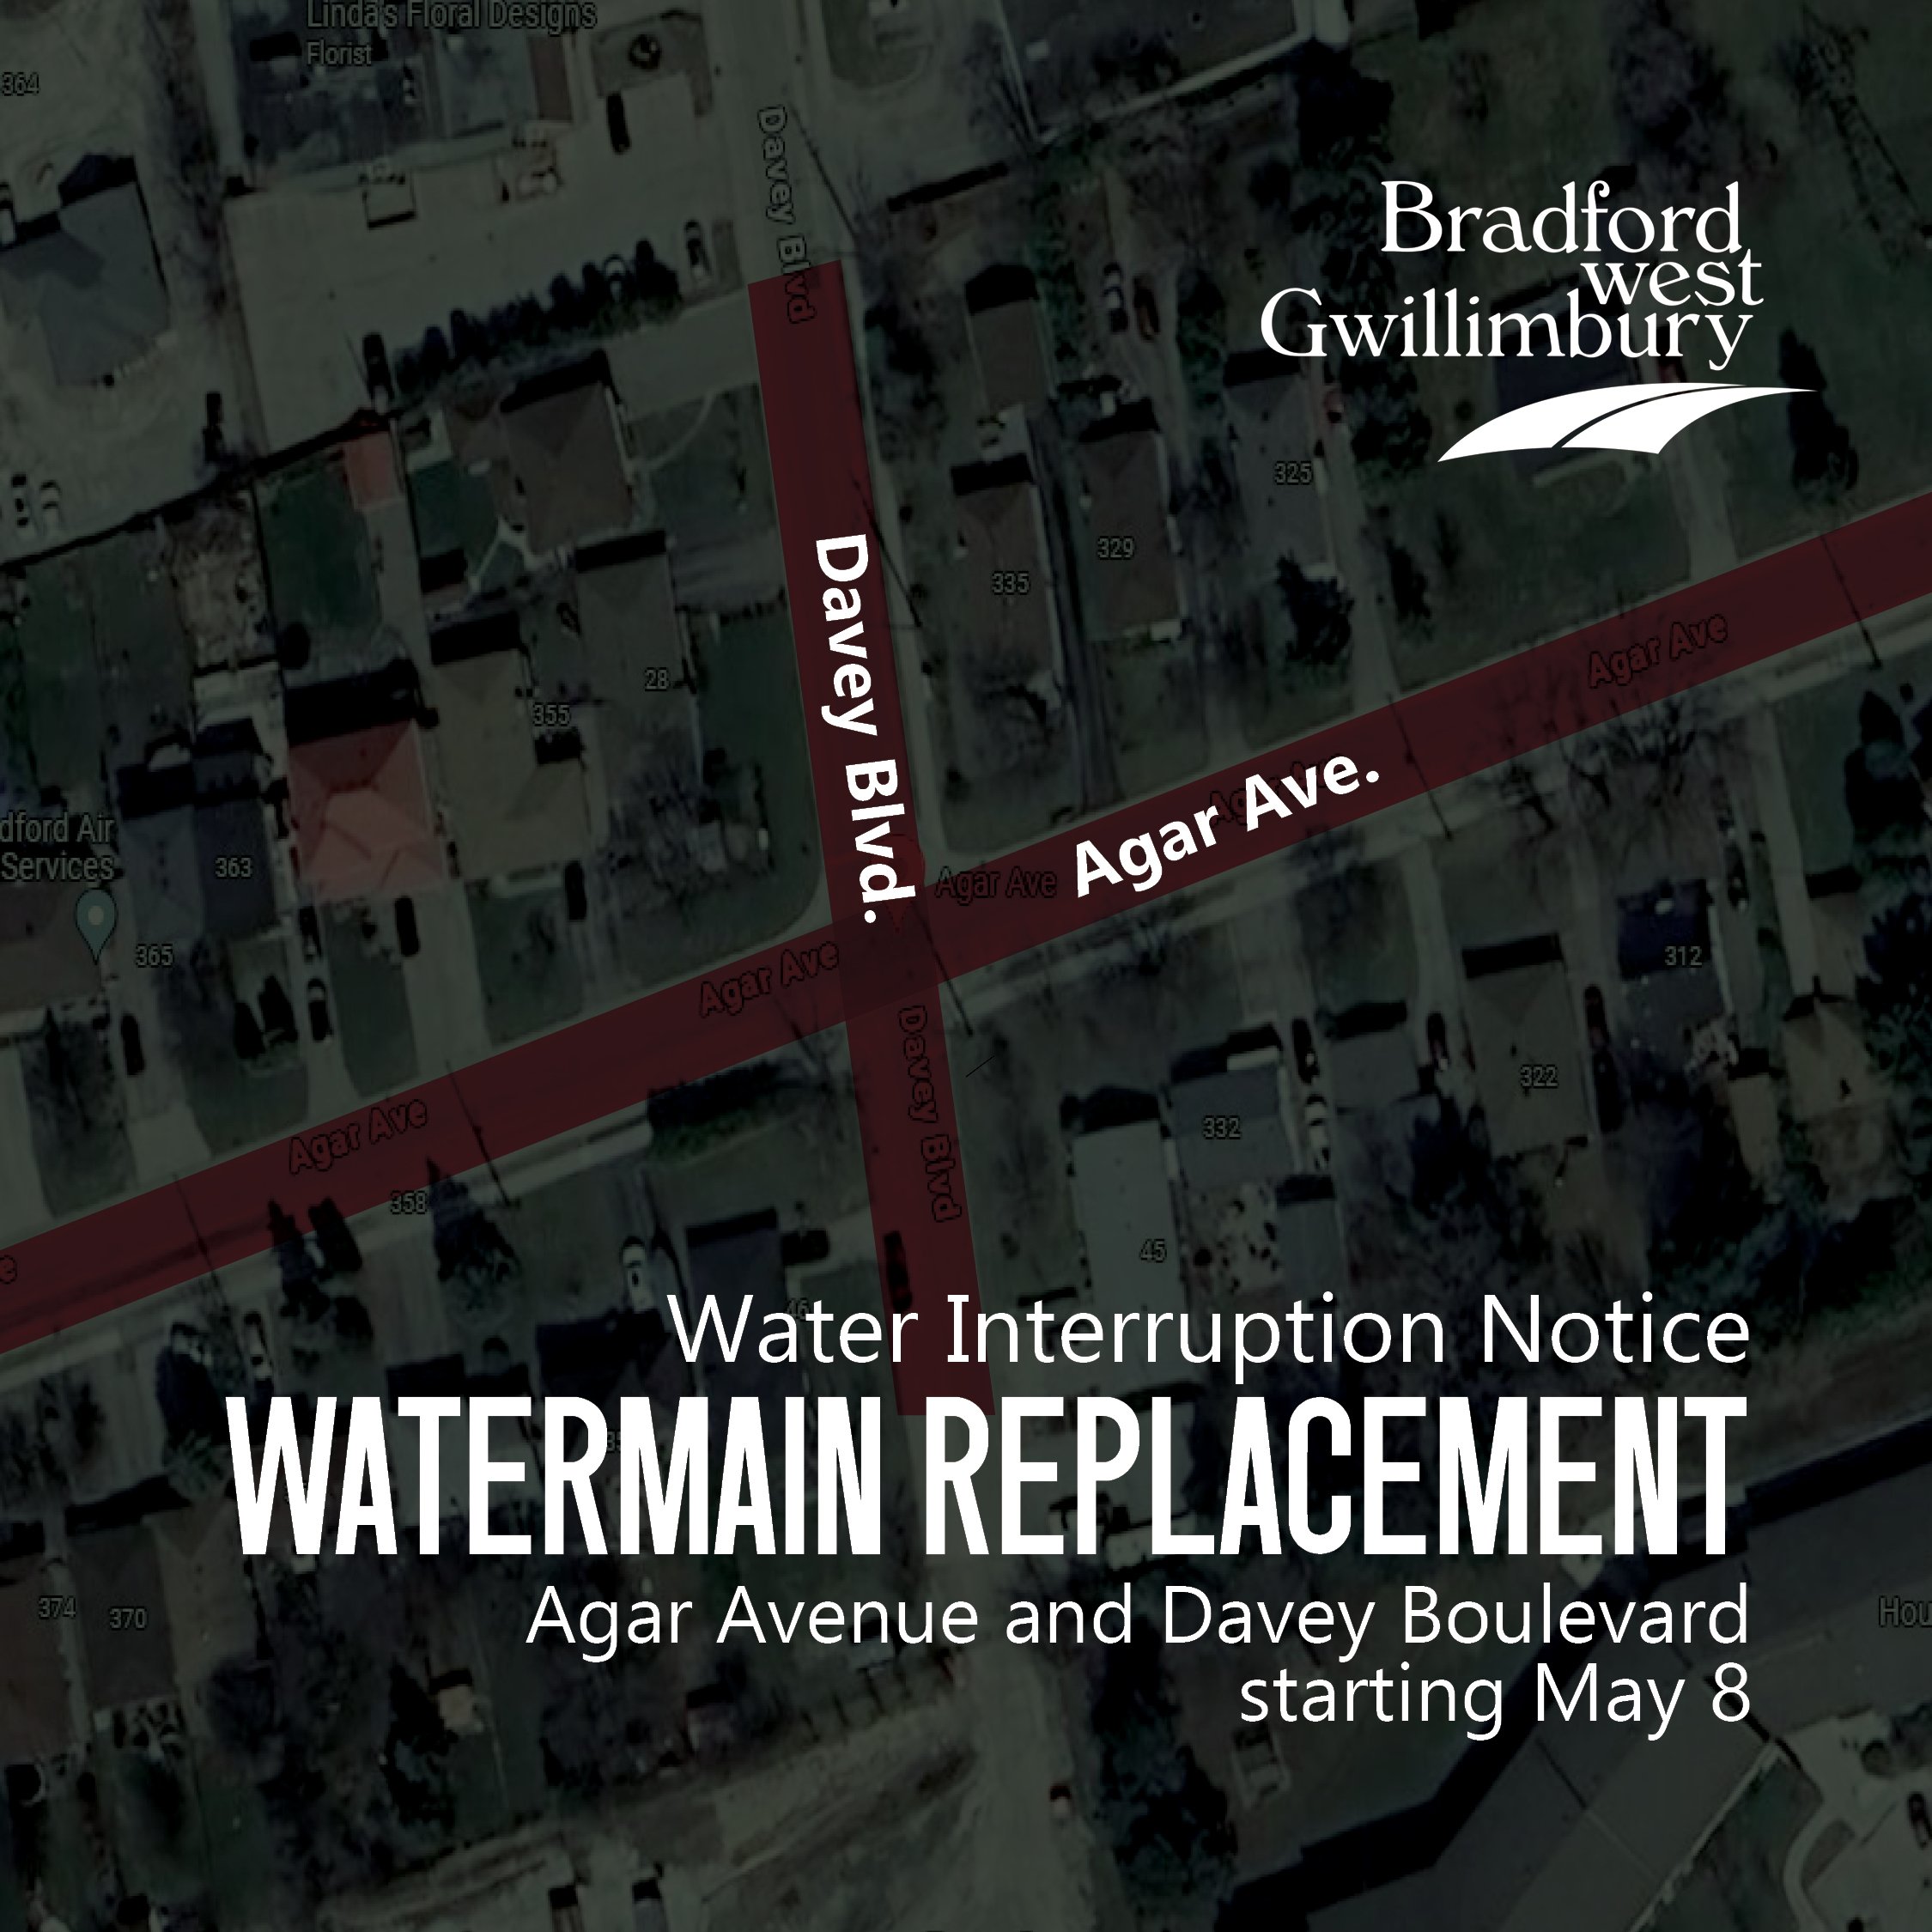 Graphic illustrating the areas of the water interruption